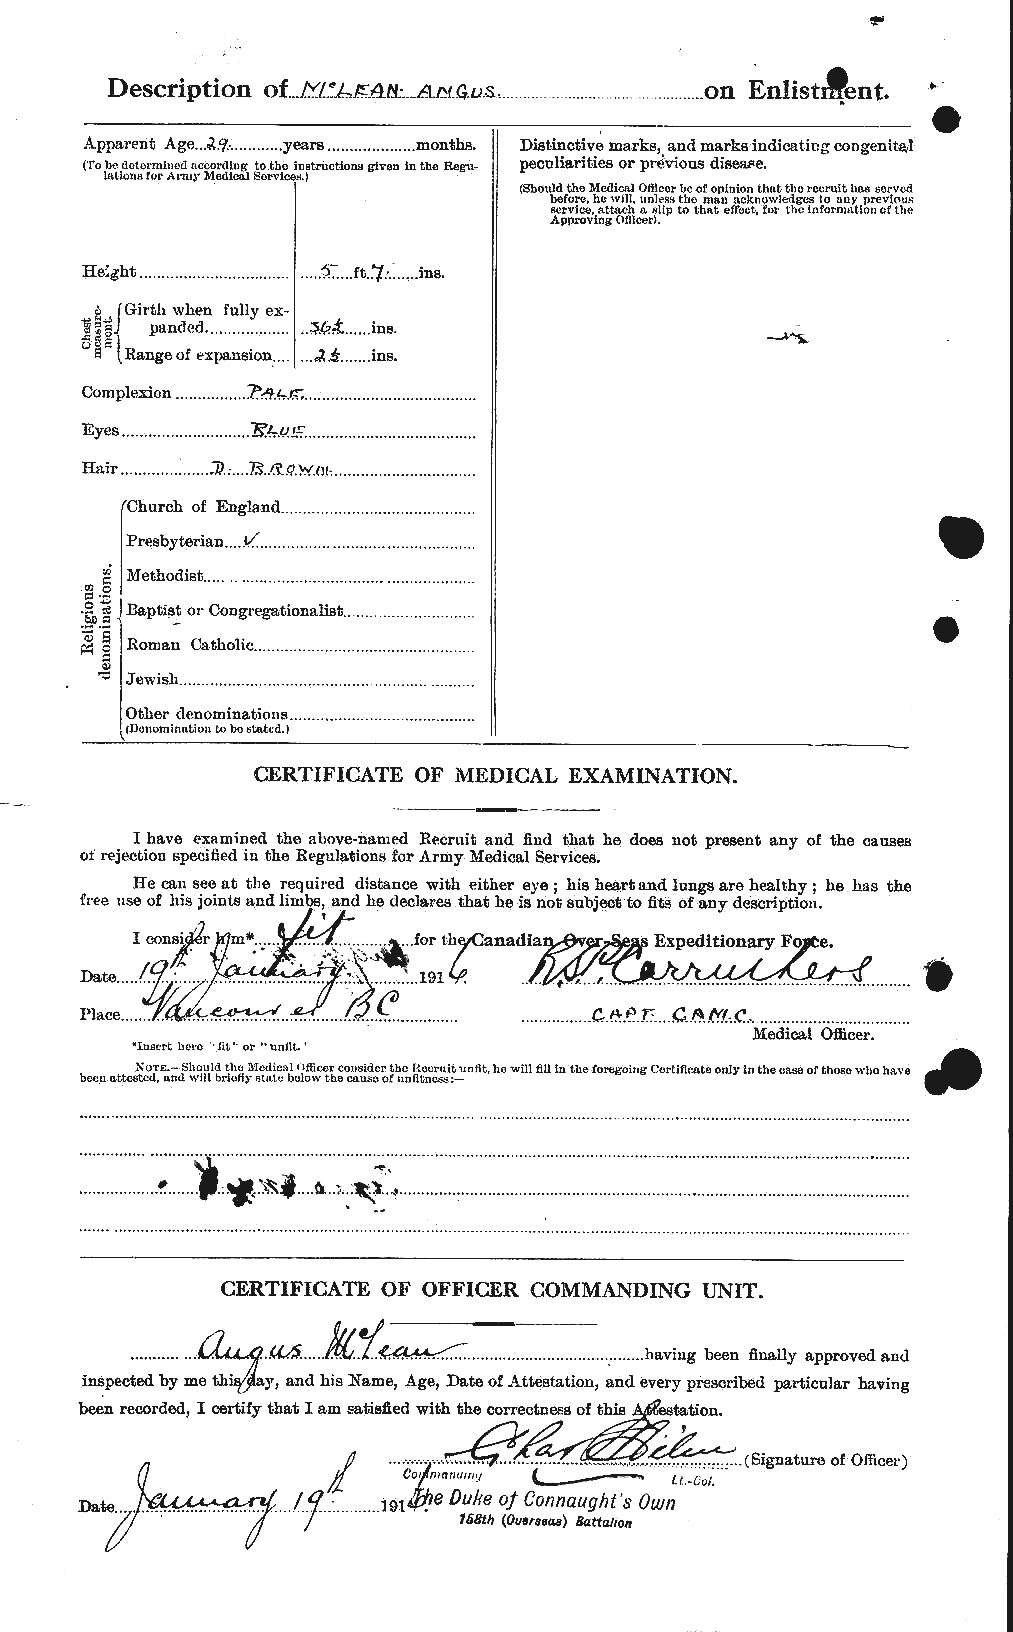 Personnel Records of the First World War - CEF 532813b